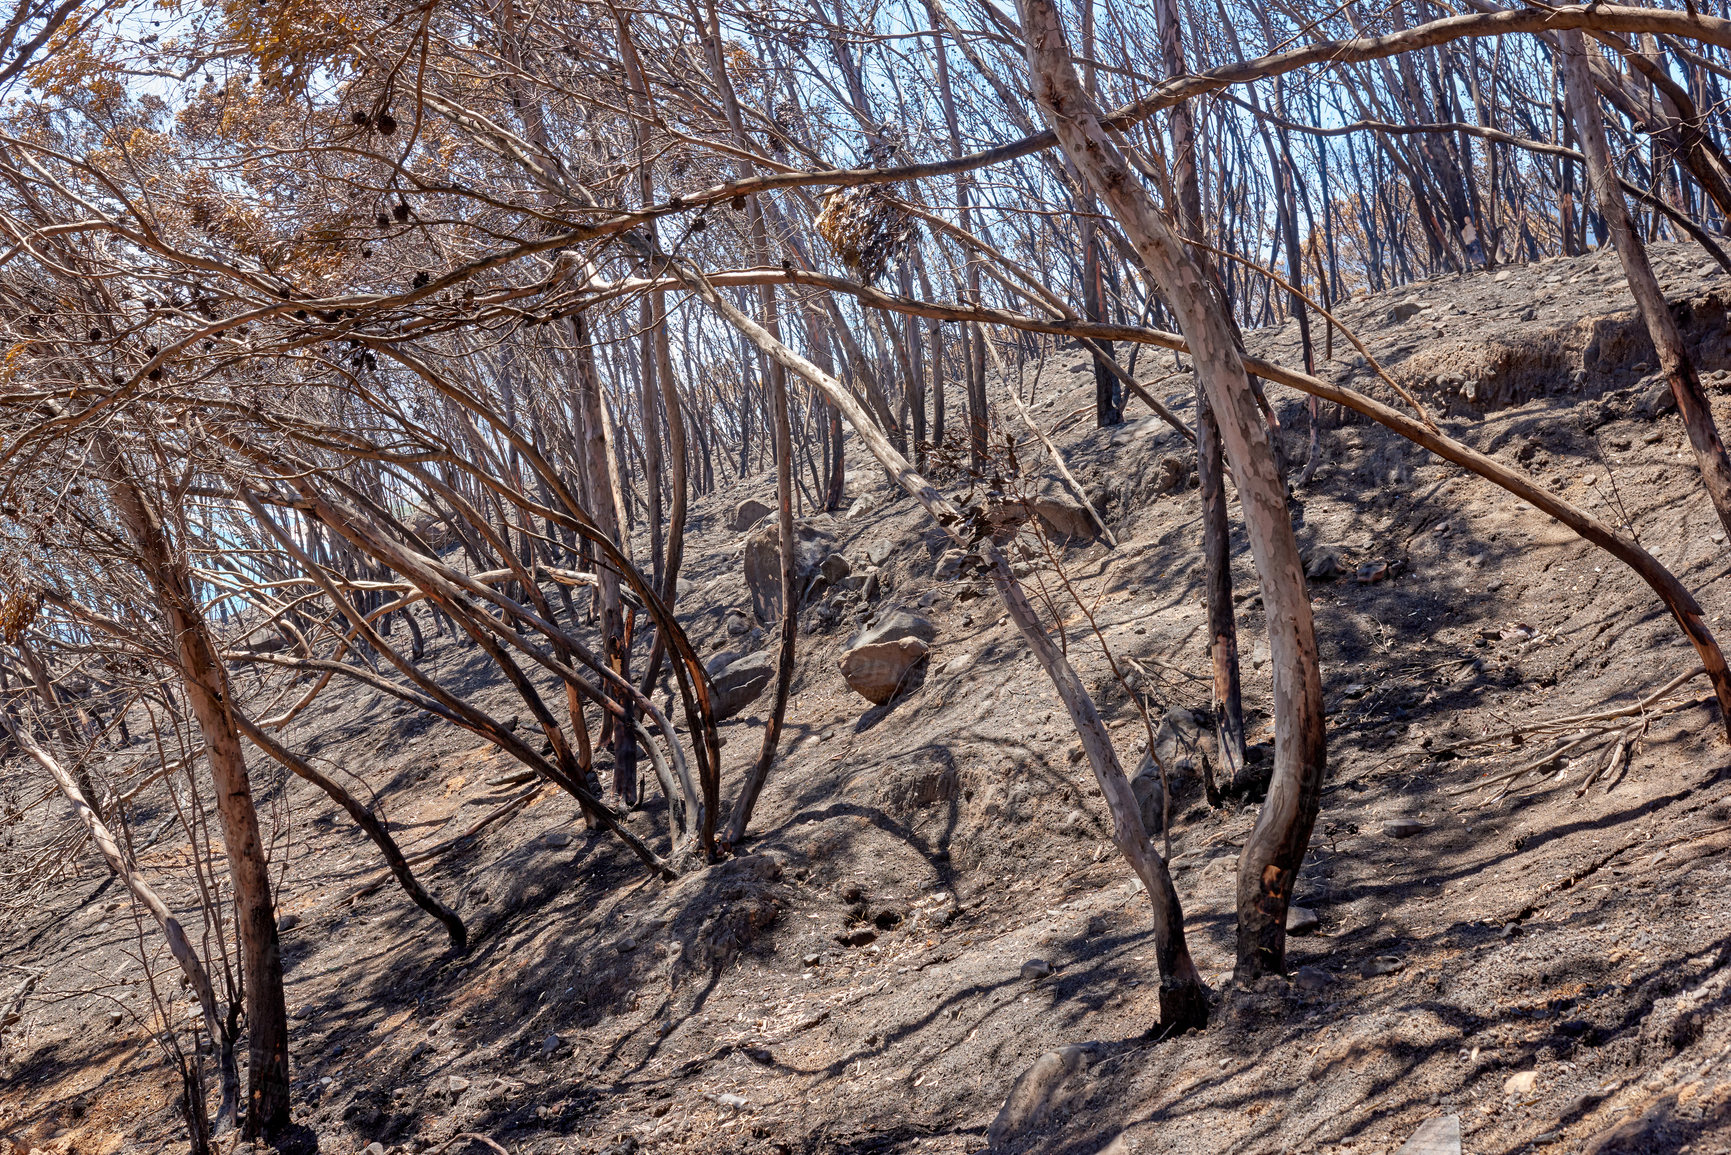 Buy stock photo A view of a burnt tree with branches on the field after the fire caught in the forest. Dry broken tree branches in the spring forest on a bright sunny day. Dead trees are standing in an uncultivated.